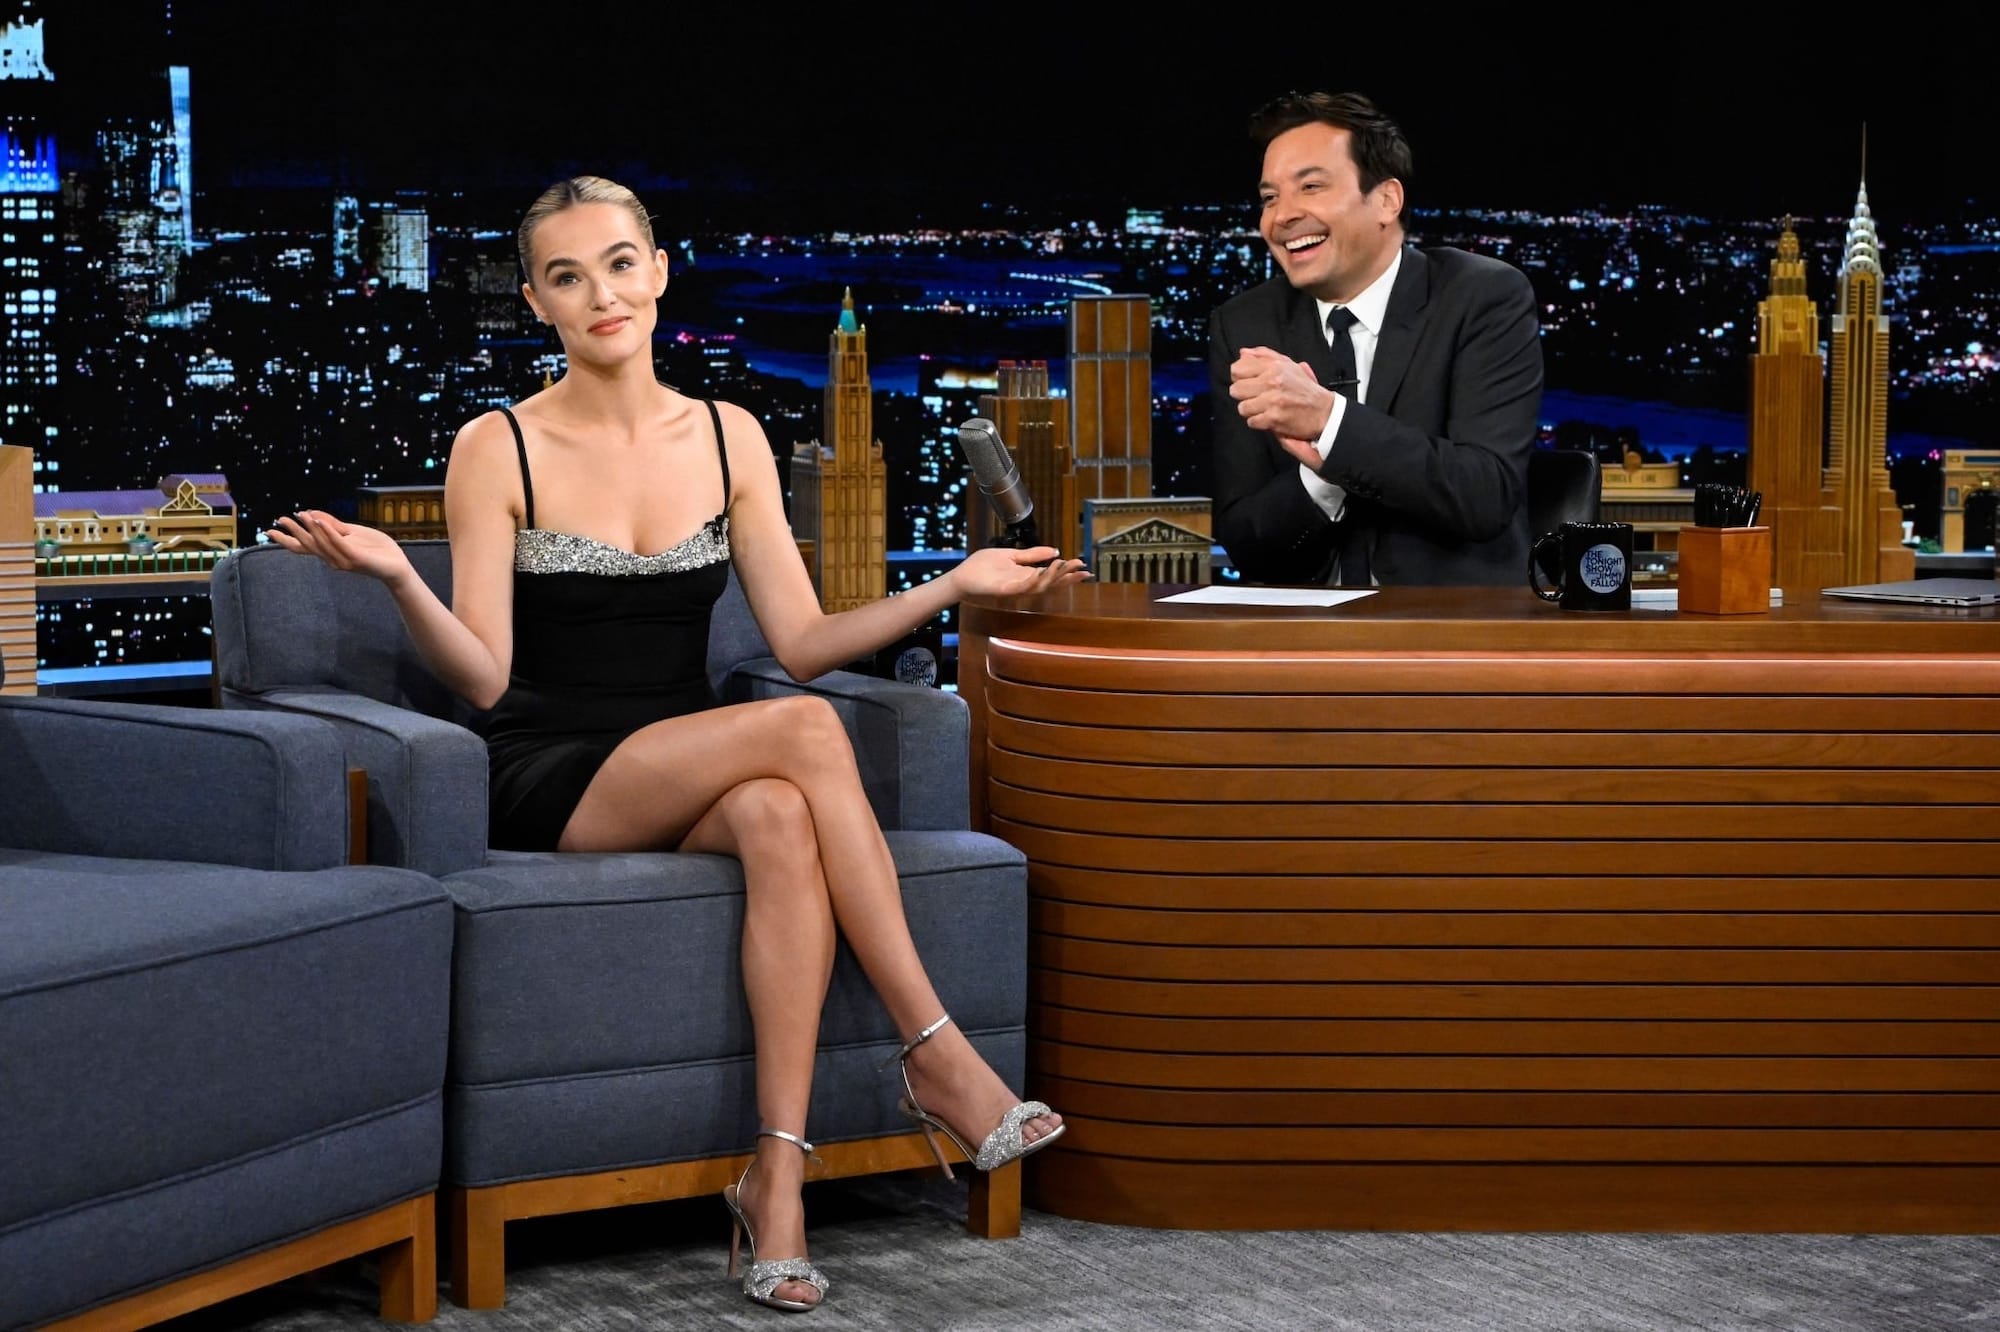 Zoey Deutch with Jimmy Fallon on The Tonight Show on August 4th, 2022.